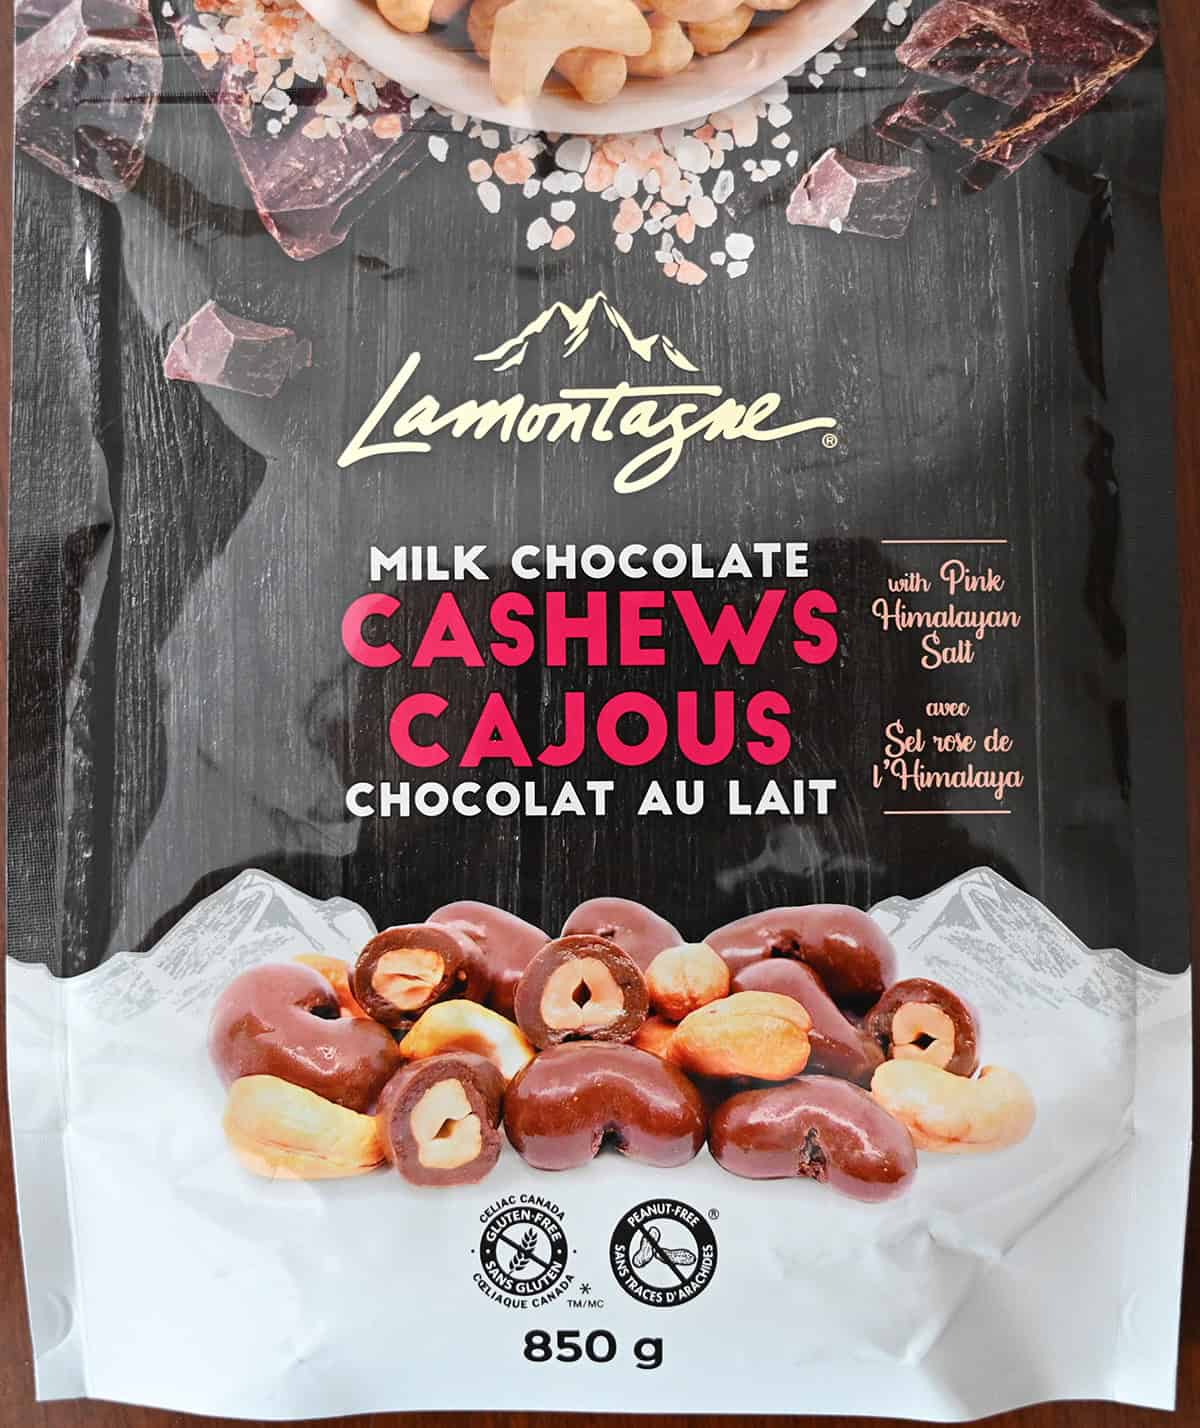 Closeup image of the front of the bag of milk chocolate cashews showing the size of the bag and that they're gluten-free and peanut-free.